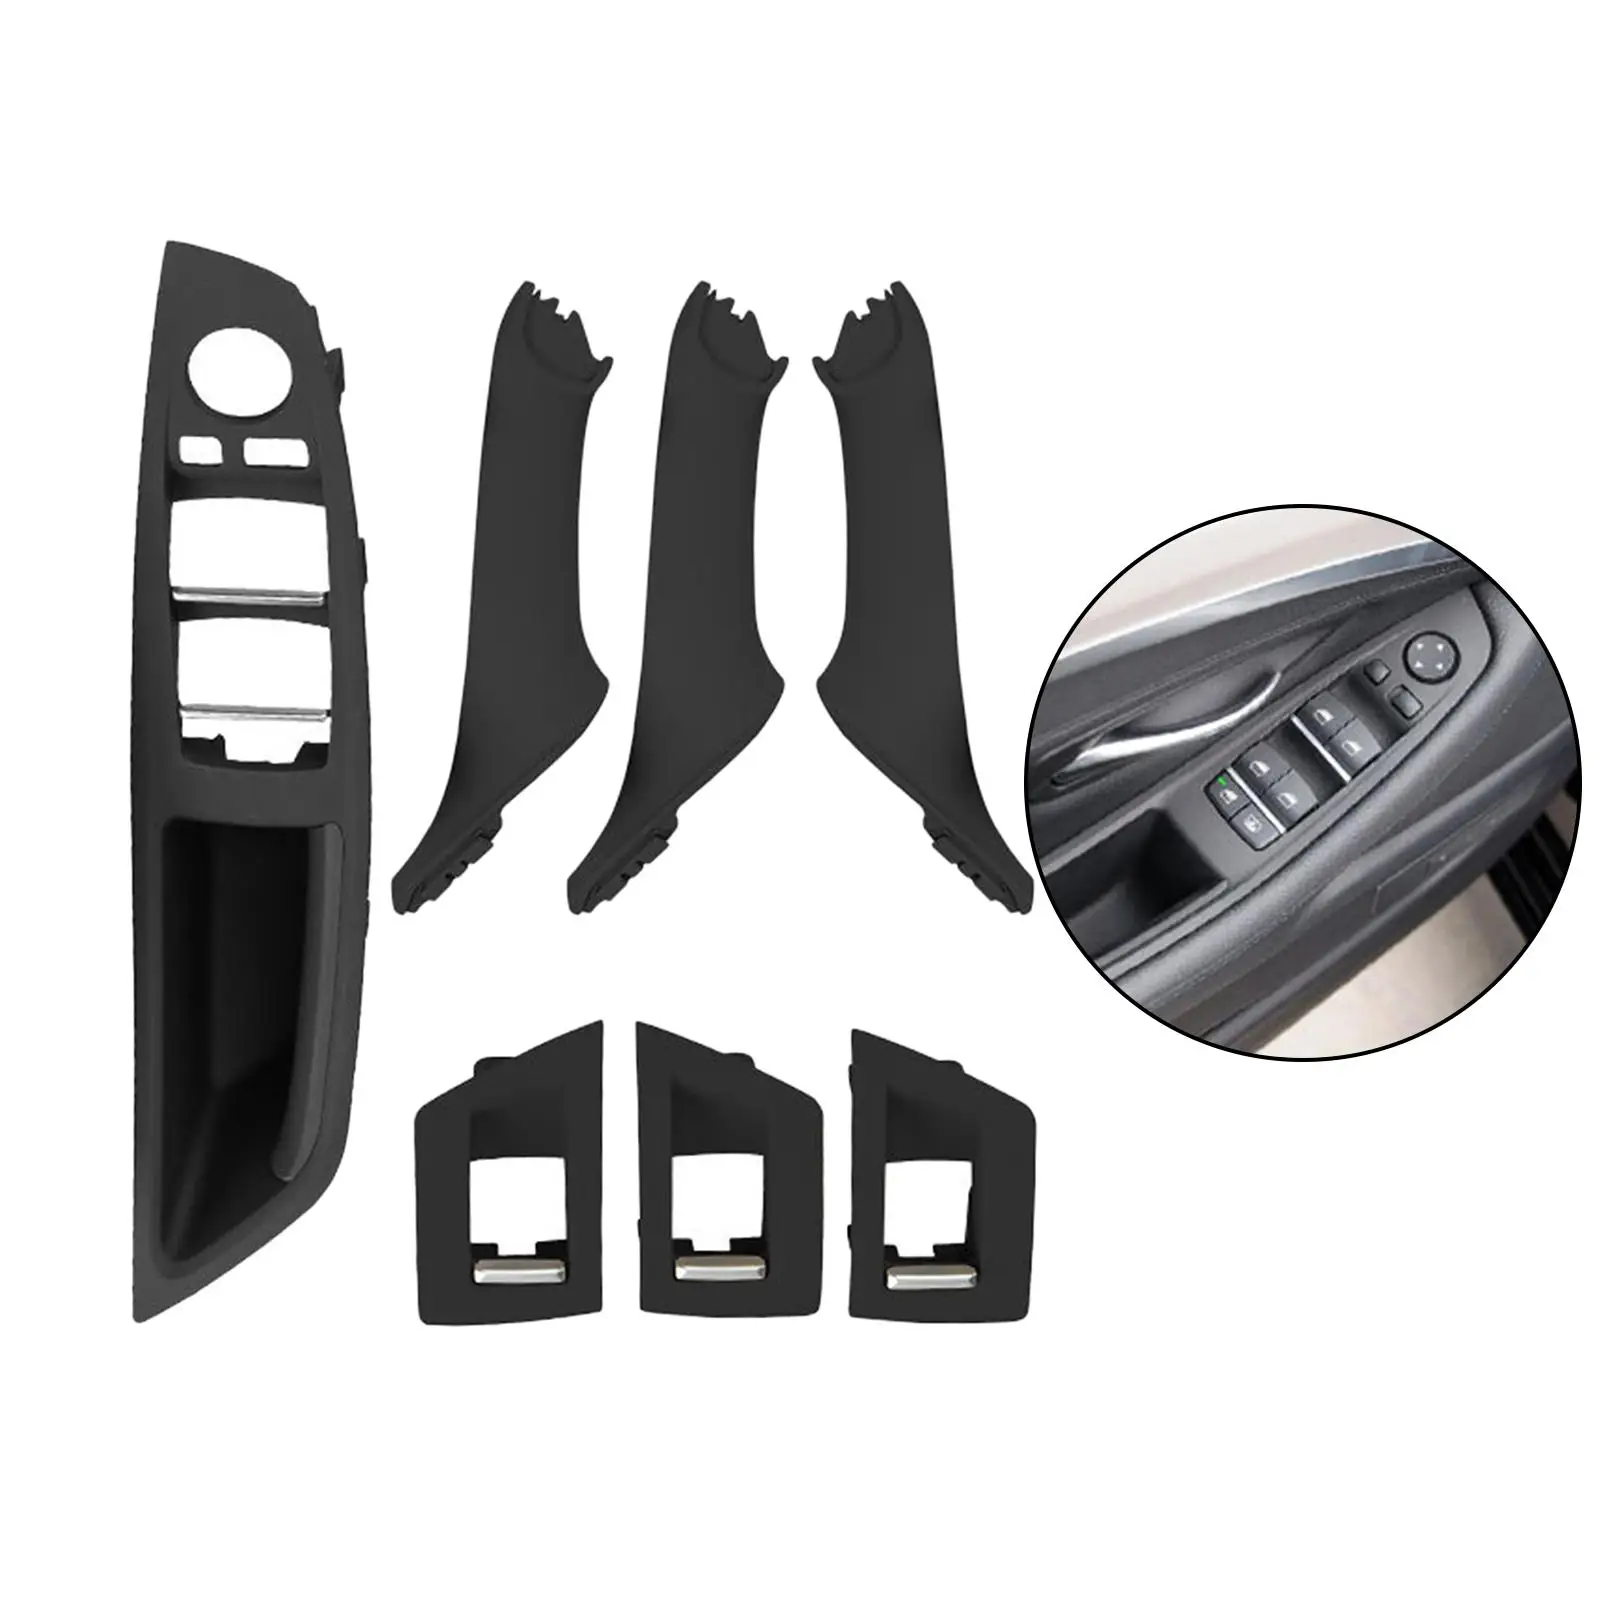 7 Pieces Vehicle Car Interior Door Handle Plate Cover for BMW 5 Series F10 F18, Professional